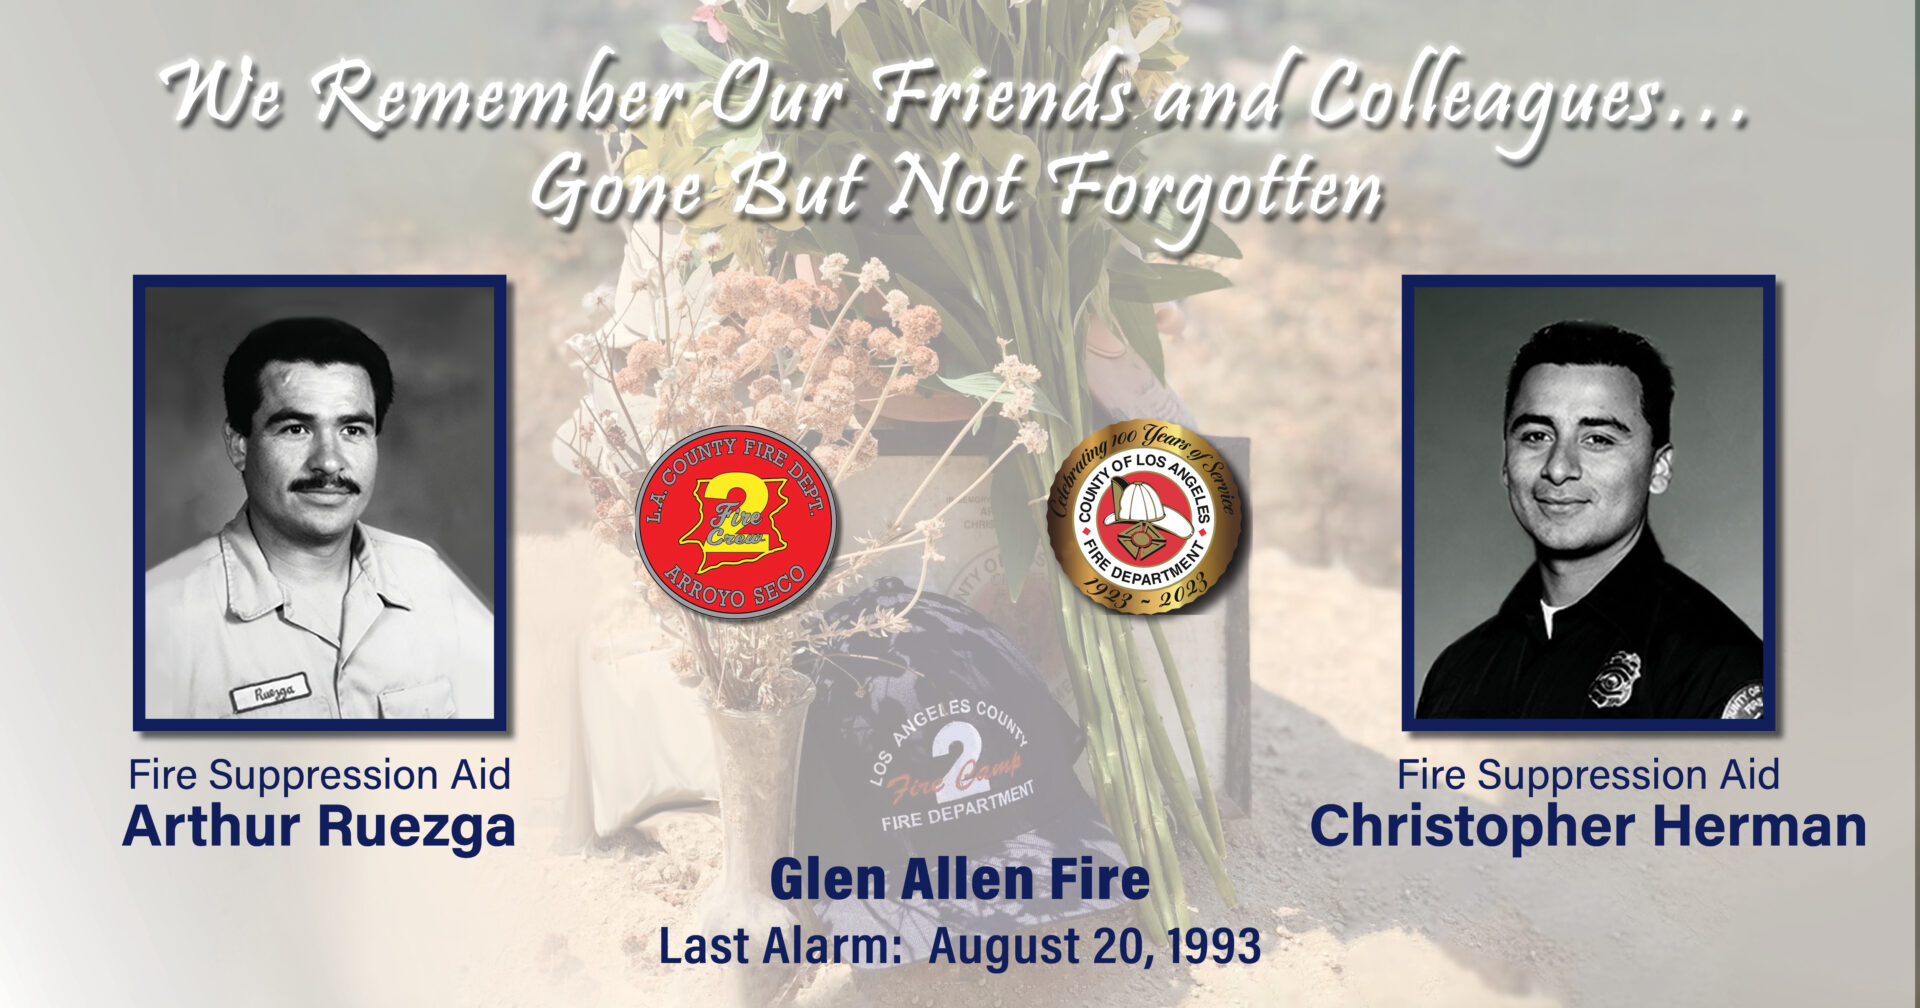 Sunday, August 20, 2023, marks the 30-year anniversary of the tragic line-of-duty deaths of County of Los Angeles Fire Department (LACoFD) Fire Suppression Aids (FSAs) Arthur Ruezga and Christopher Herman who lost their lives battling the Glen Allen Fire.